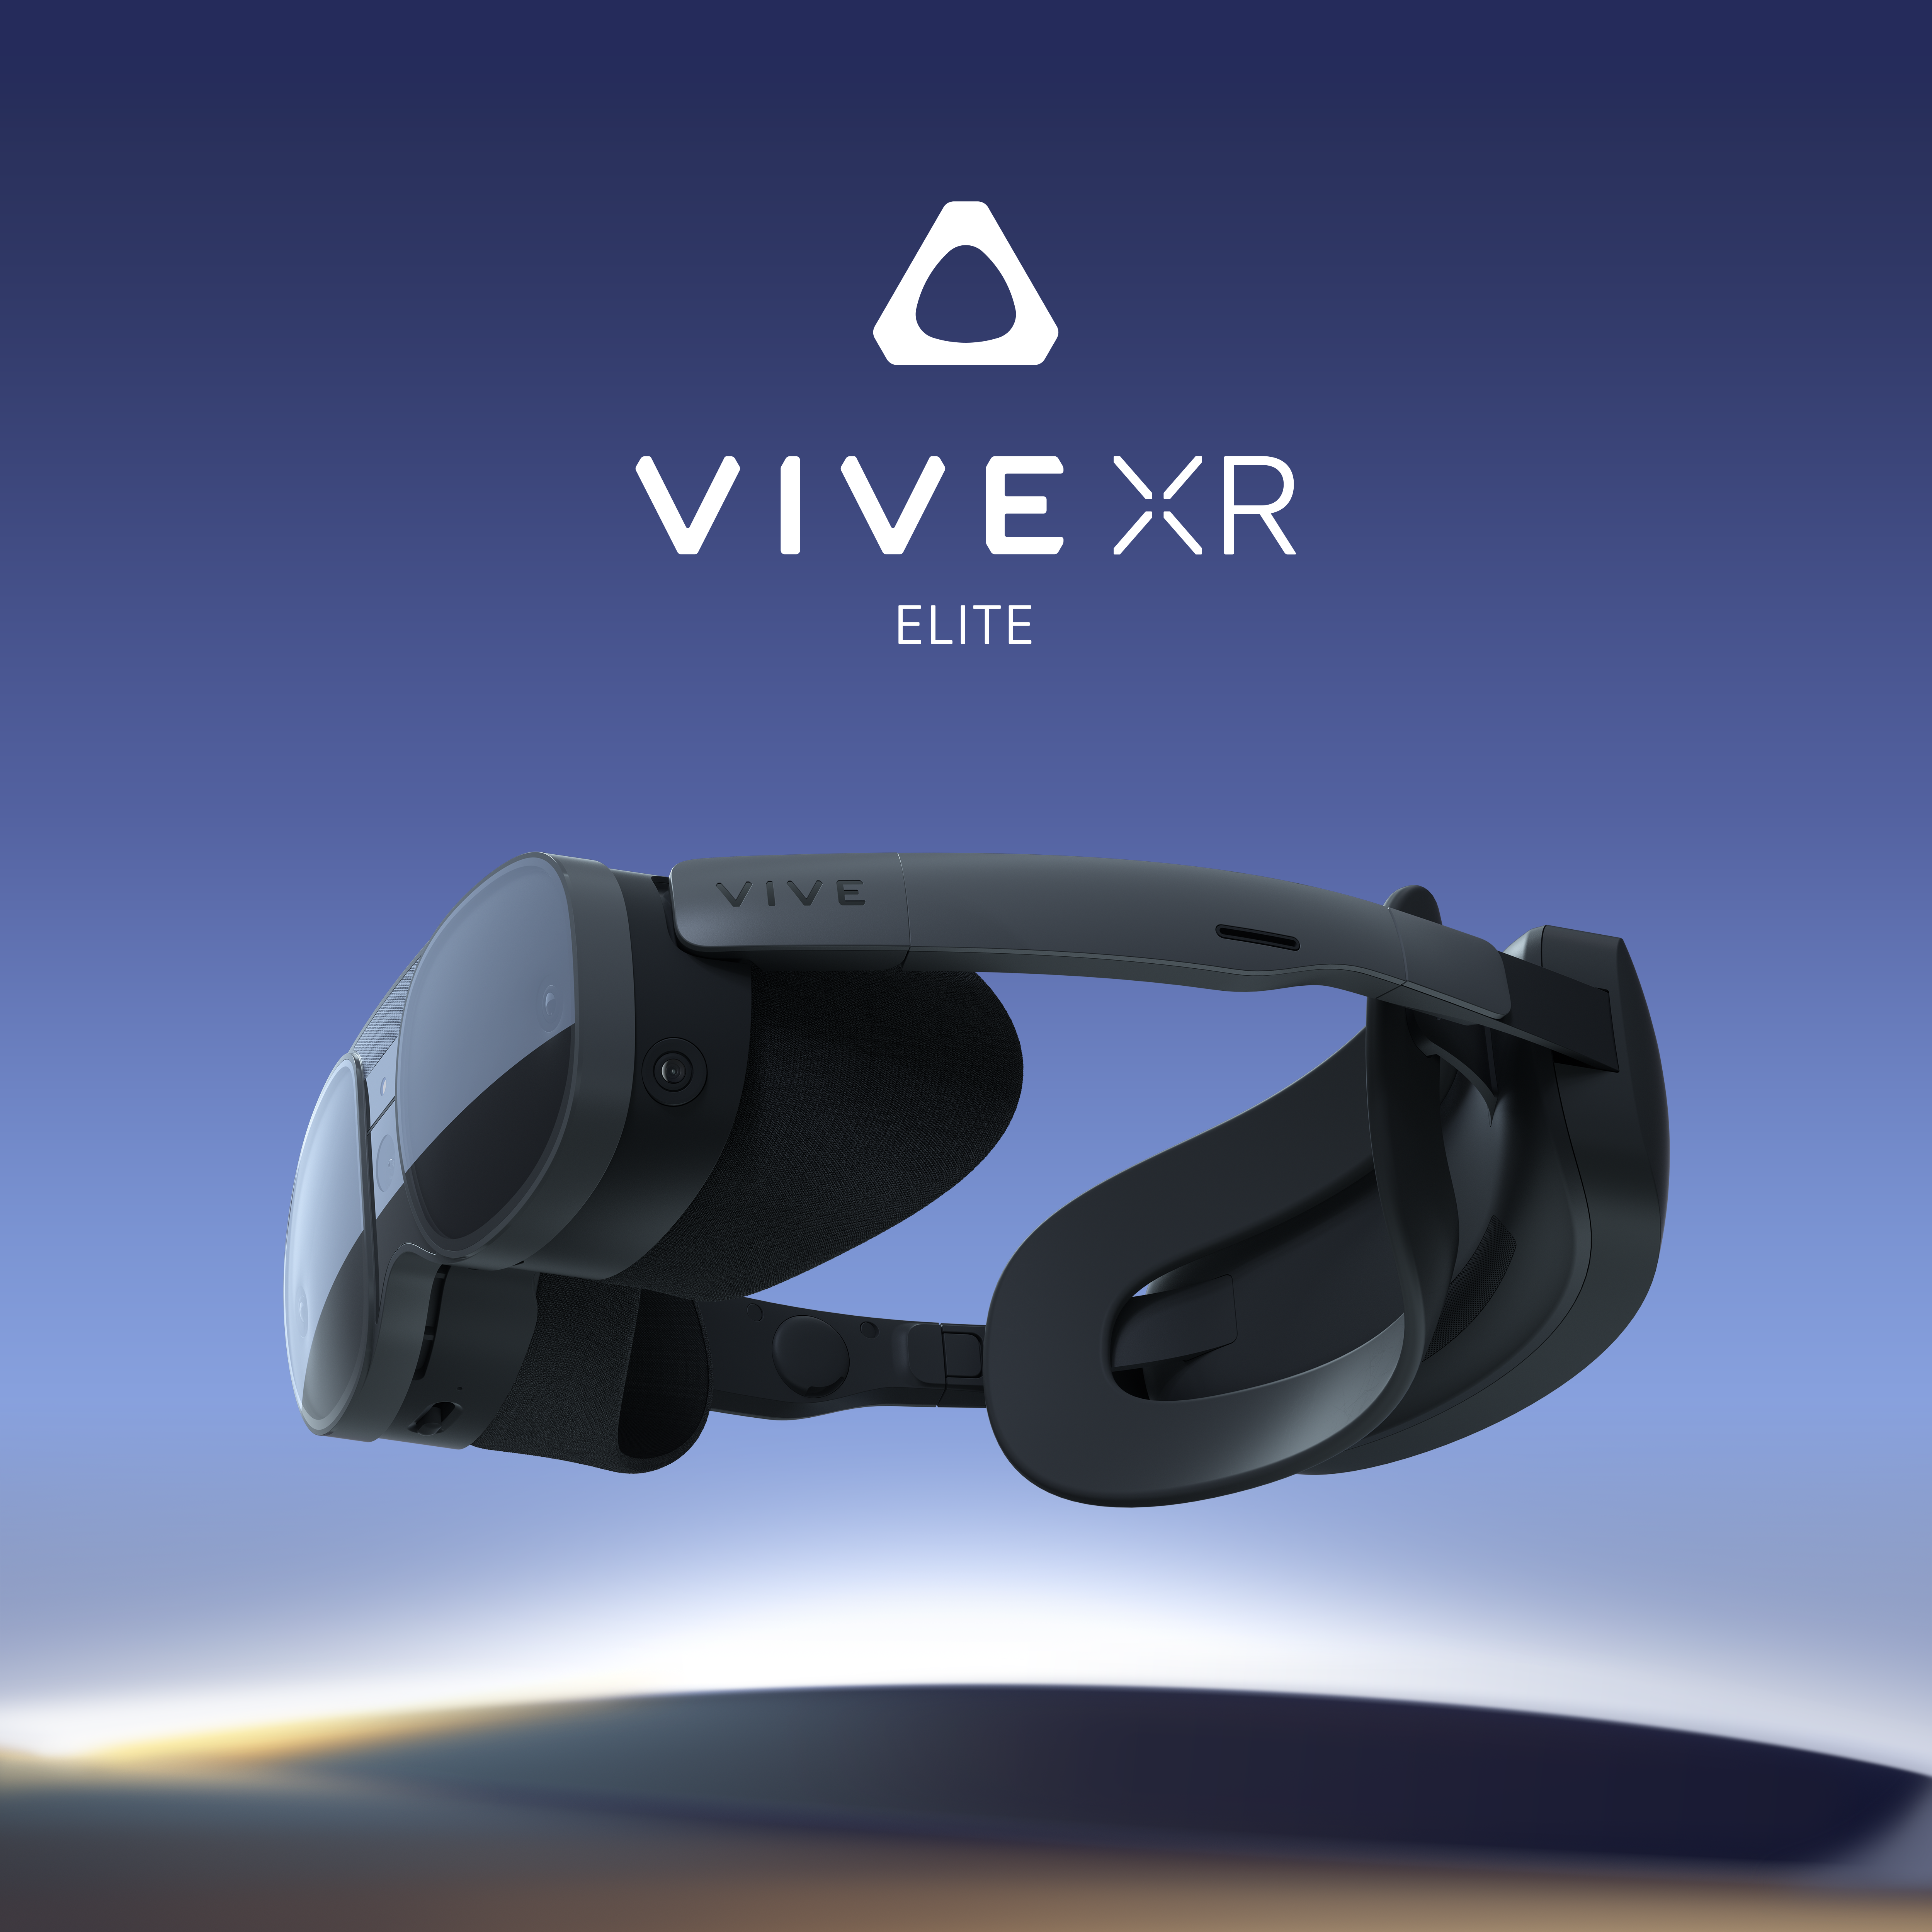 Introducing the powerful and versatile VIVE XR Elite | VIVE Blog